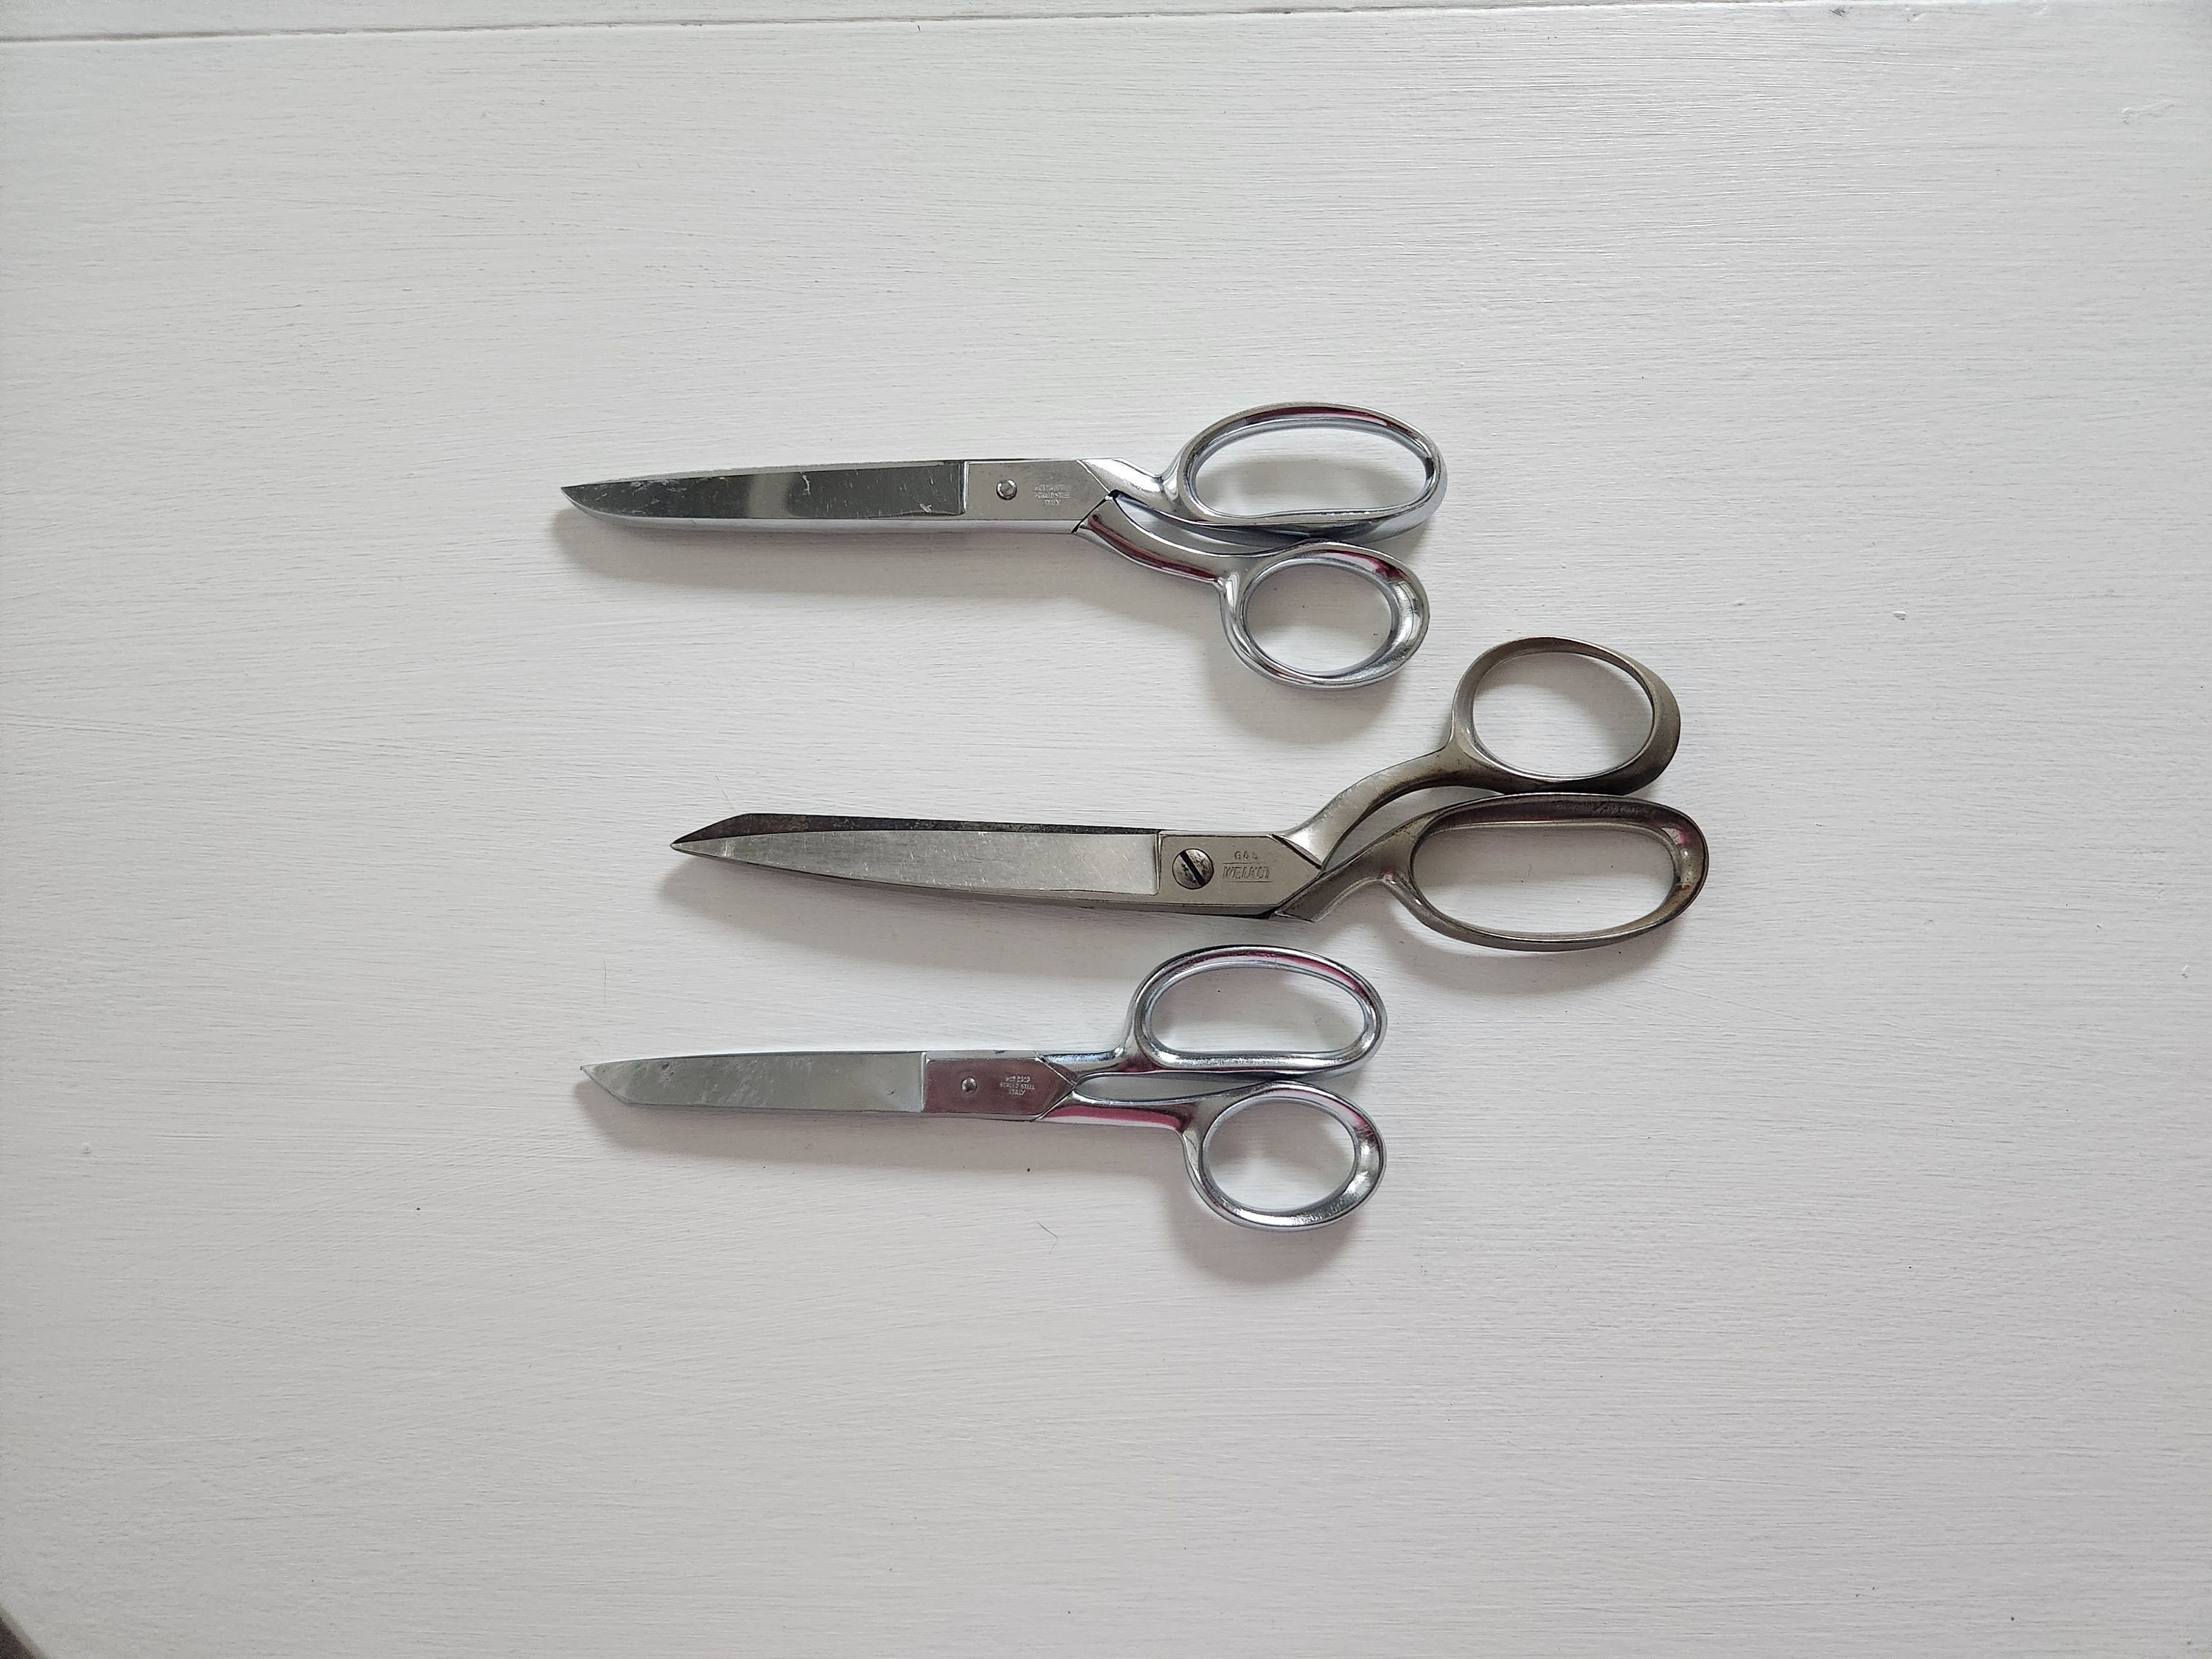 Vintage Scissors. Mixed Lot of Shears, Vintage Cutlery, Old Craft